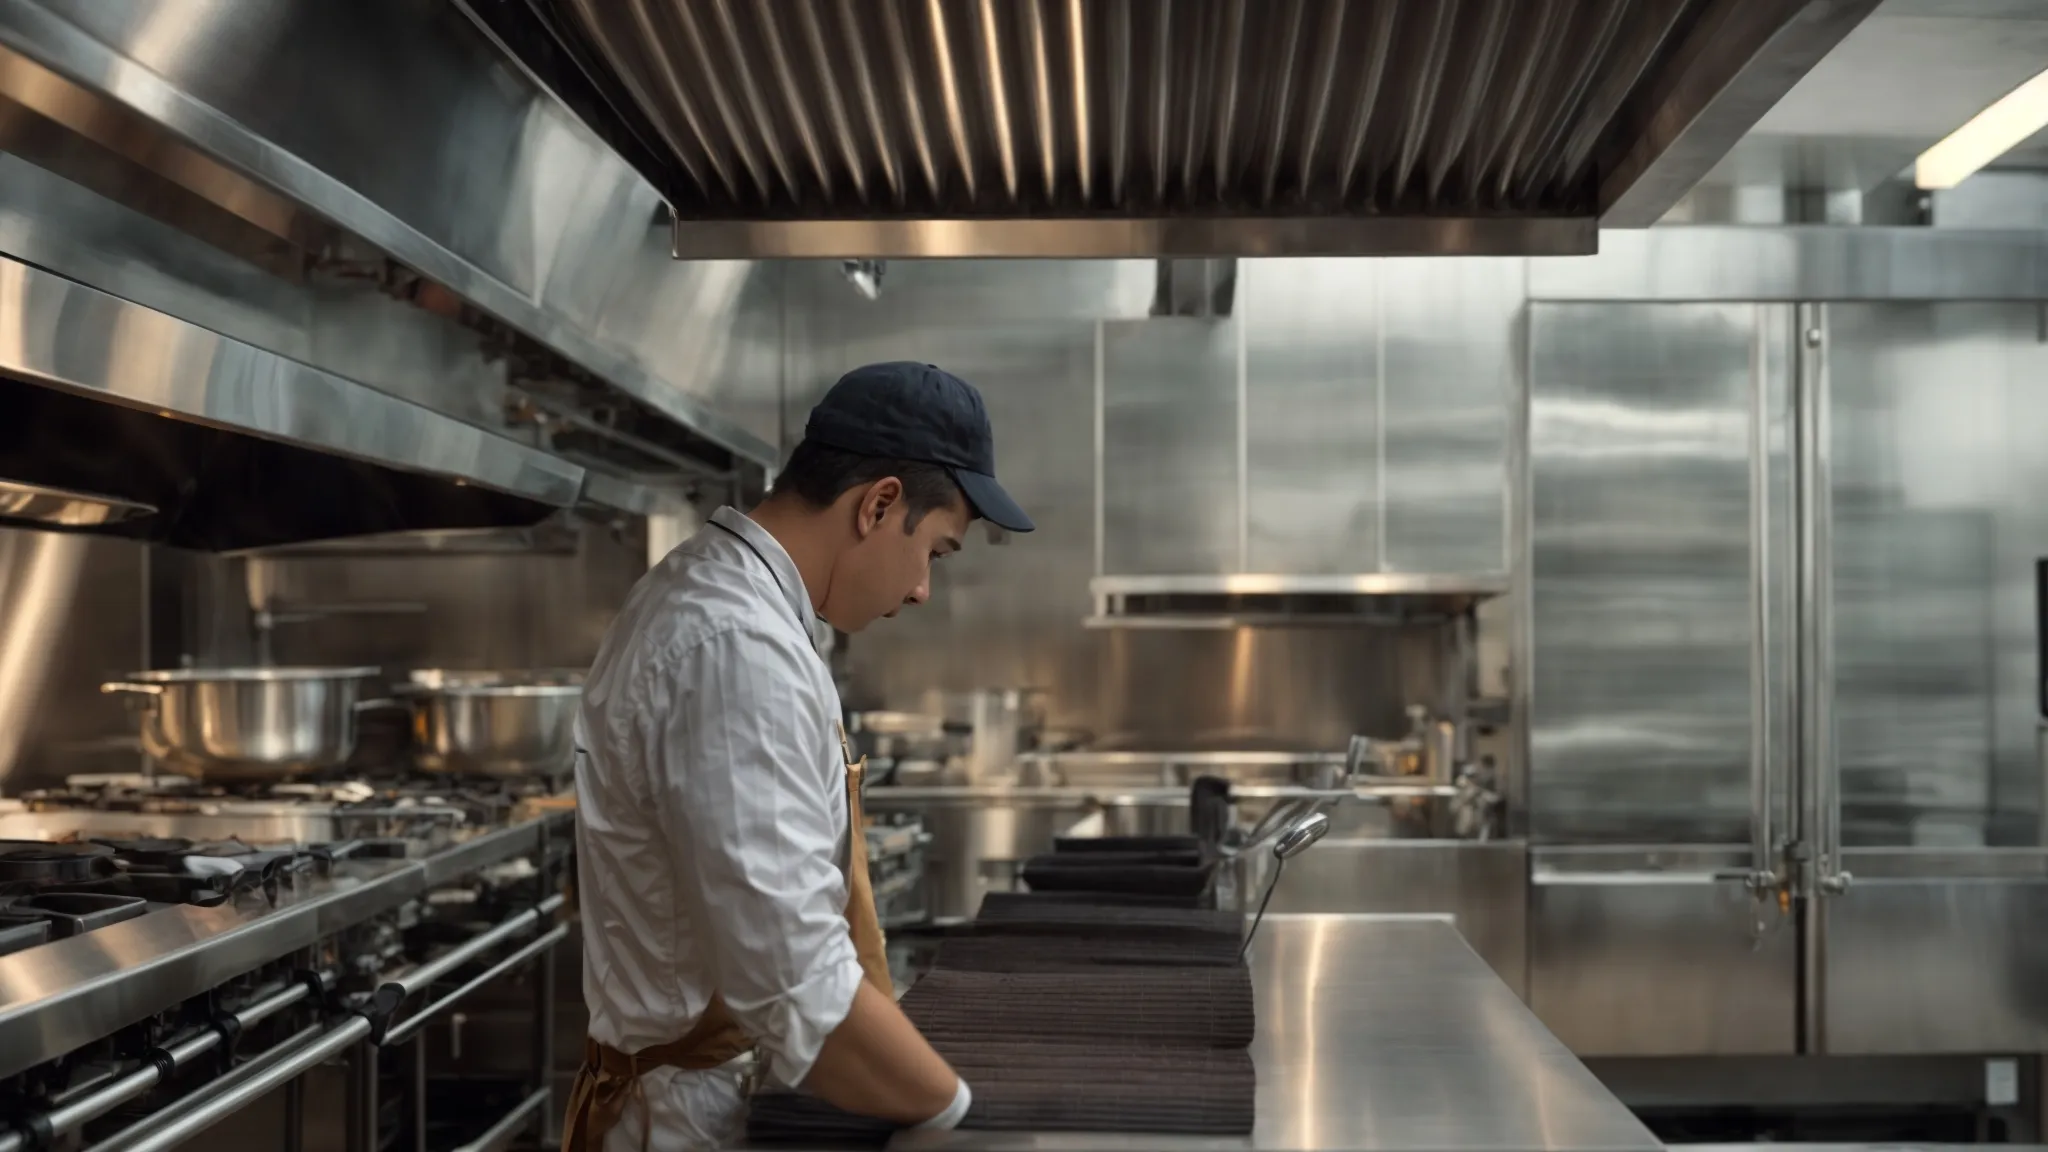 a restaurateur examines the gleaming kitchen exhaust system after a professional cleaning service visit.